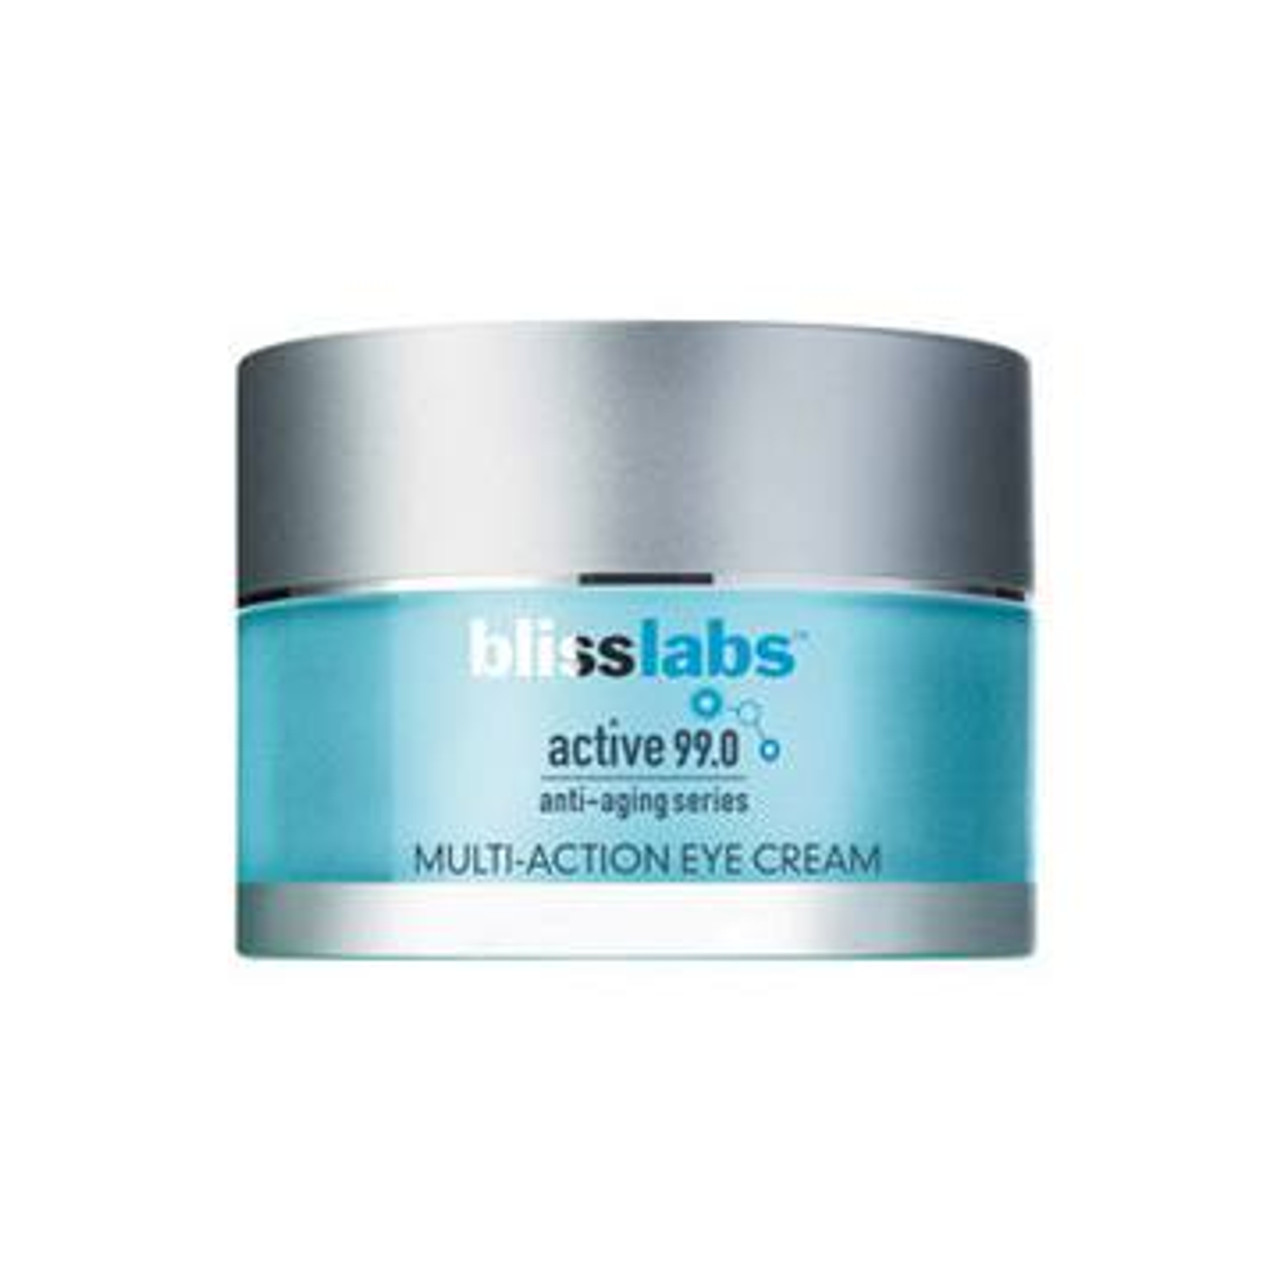 Blisslabs Active 99.0 Anti-aging Series Multi-Action Eye Cream - .5 oz